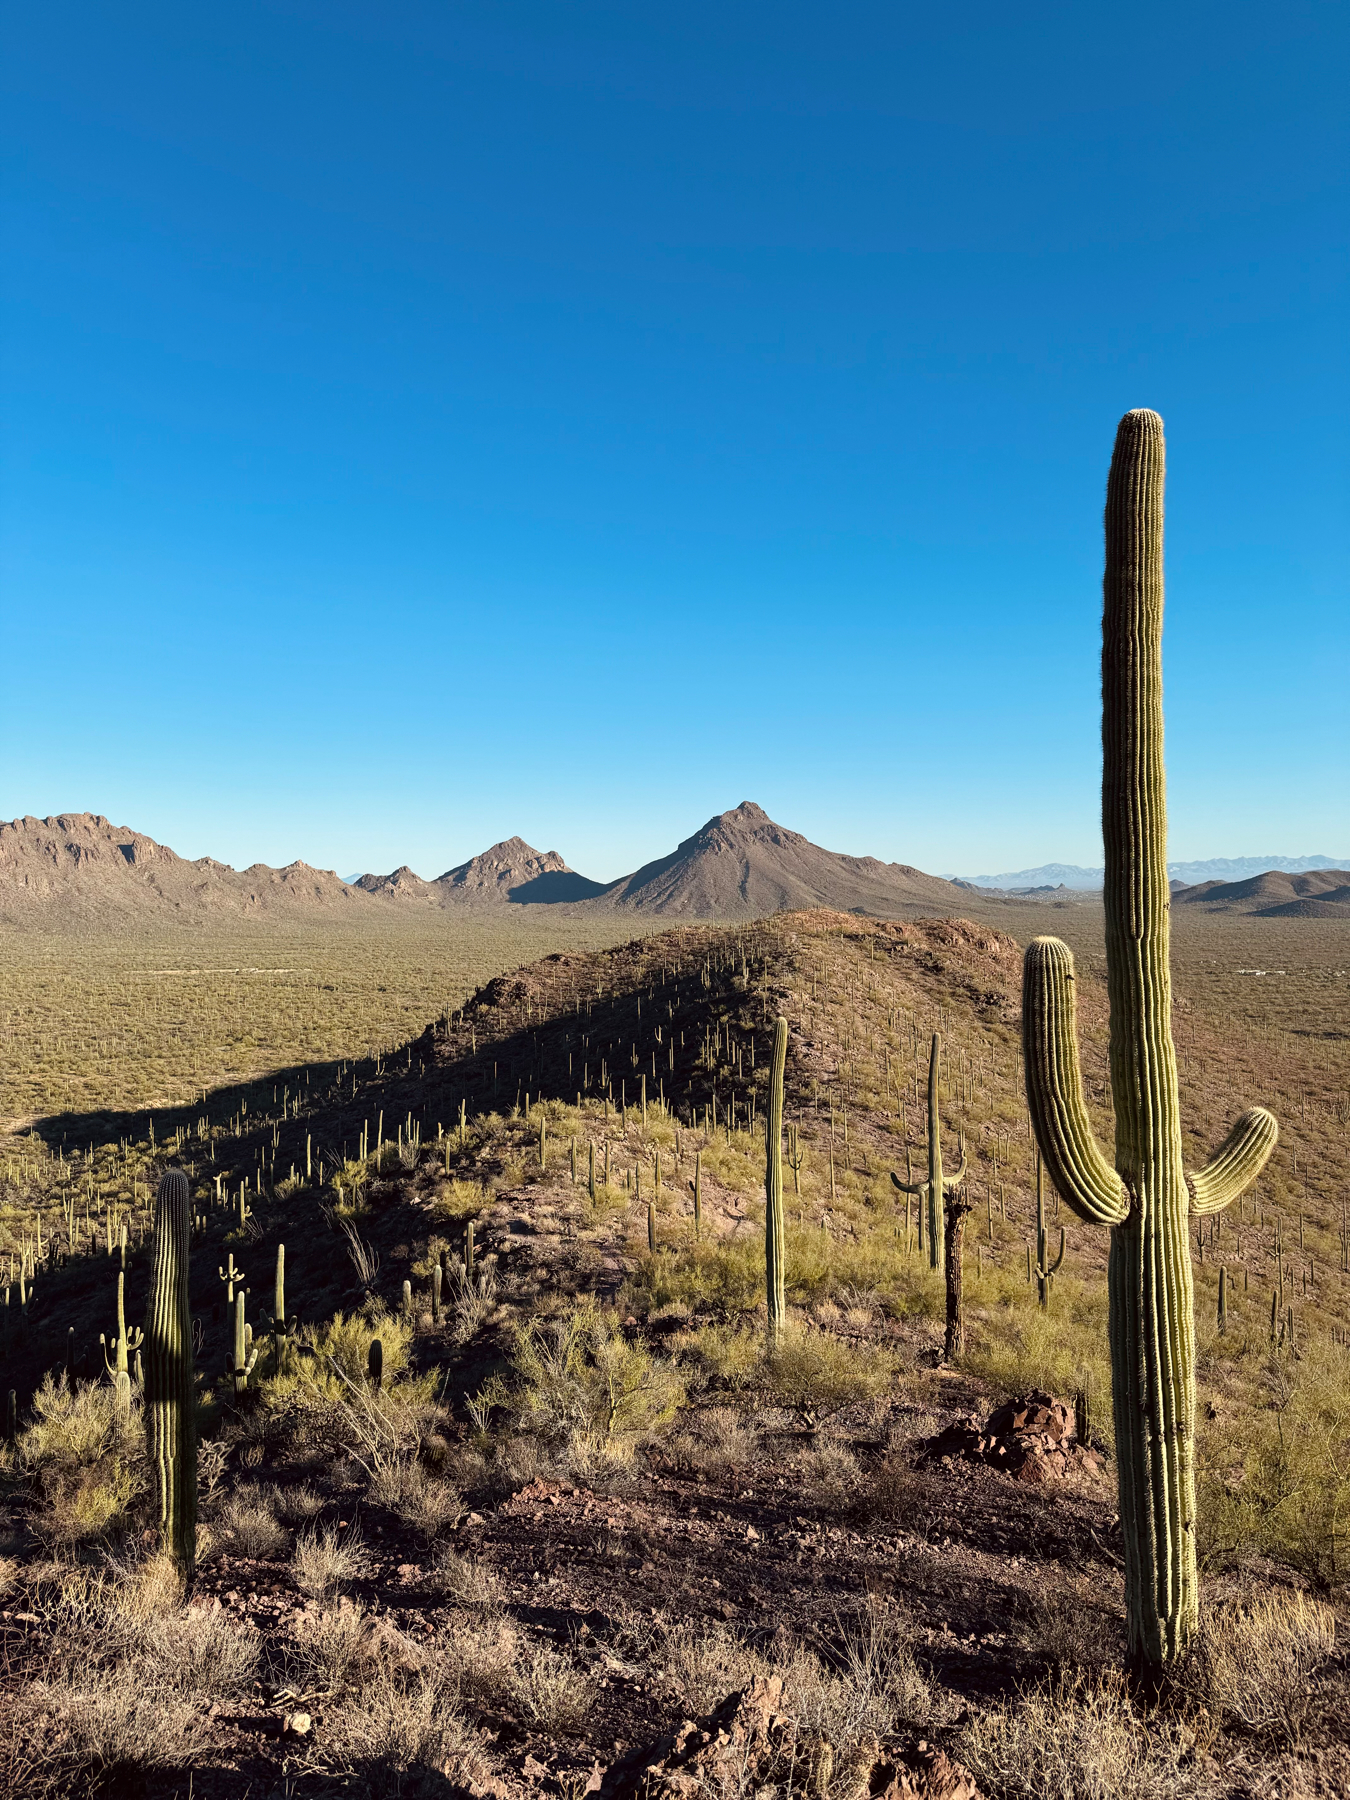 A desert landscape with numerous saguaro cacti and a clear blue sky. In the background, there are rugged mountains.